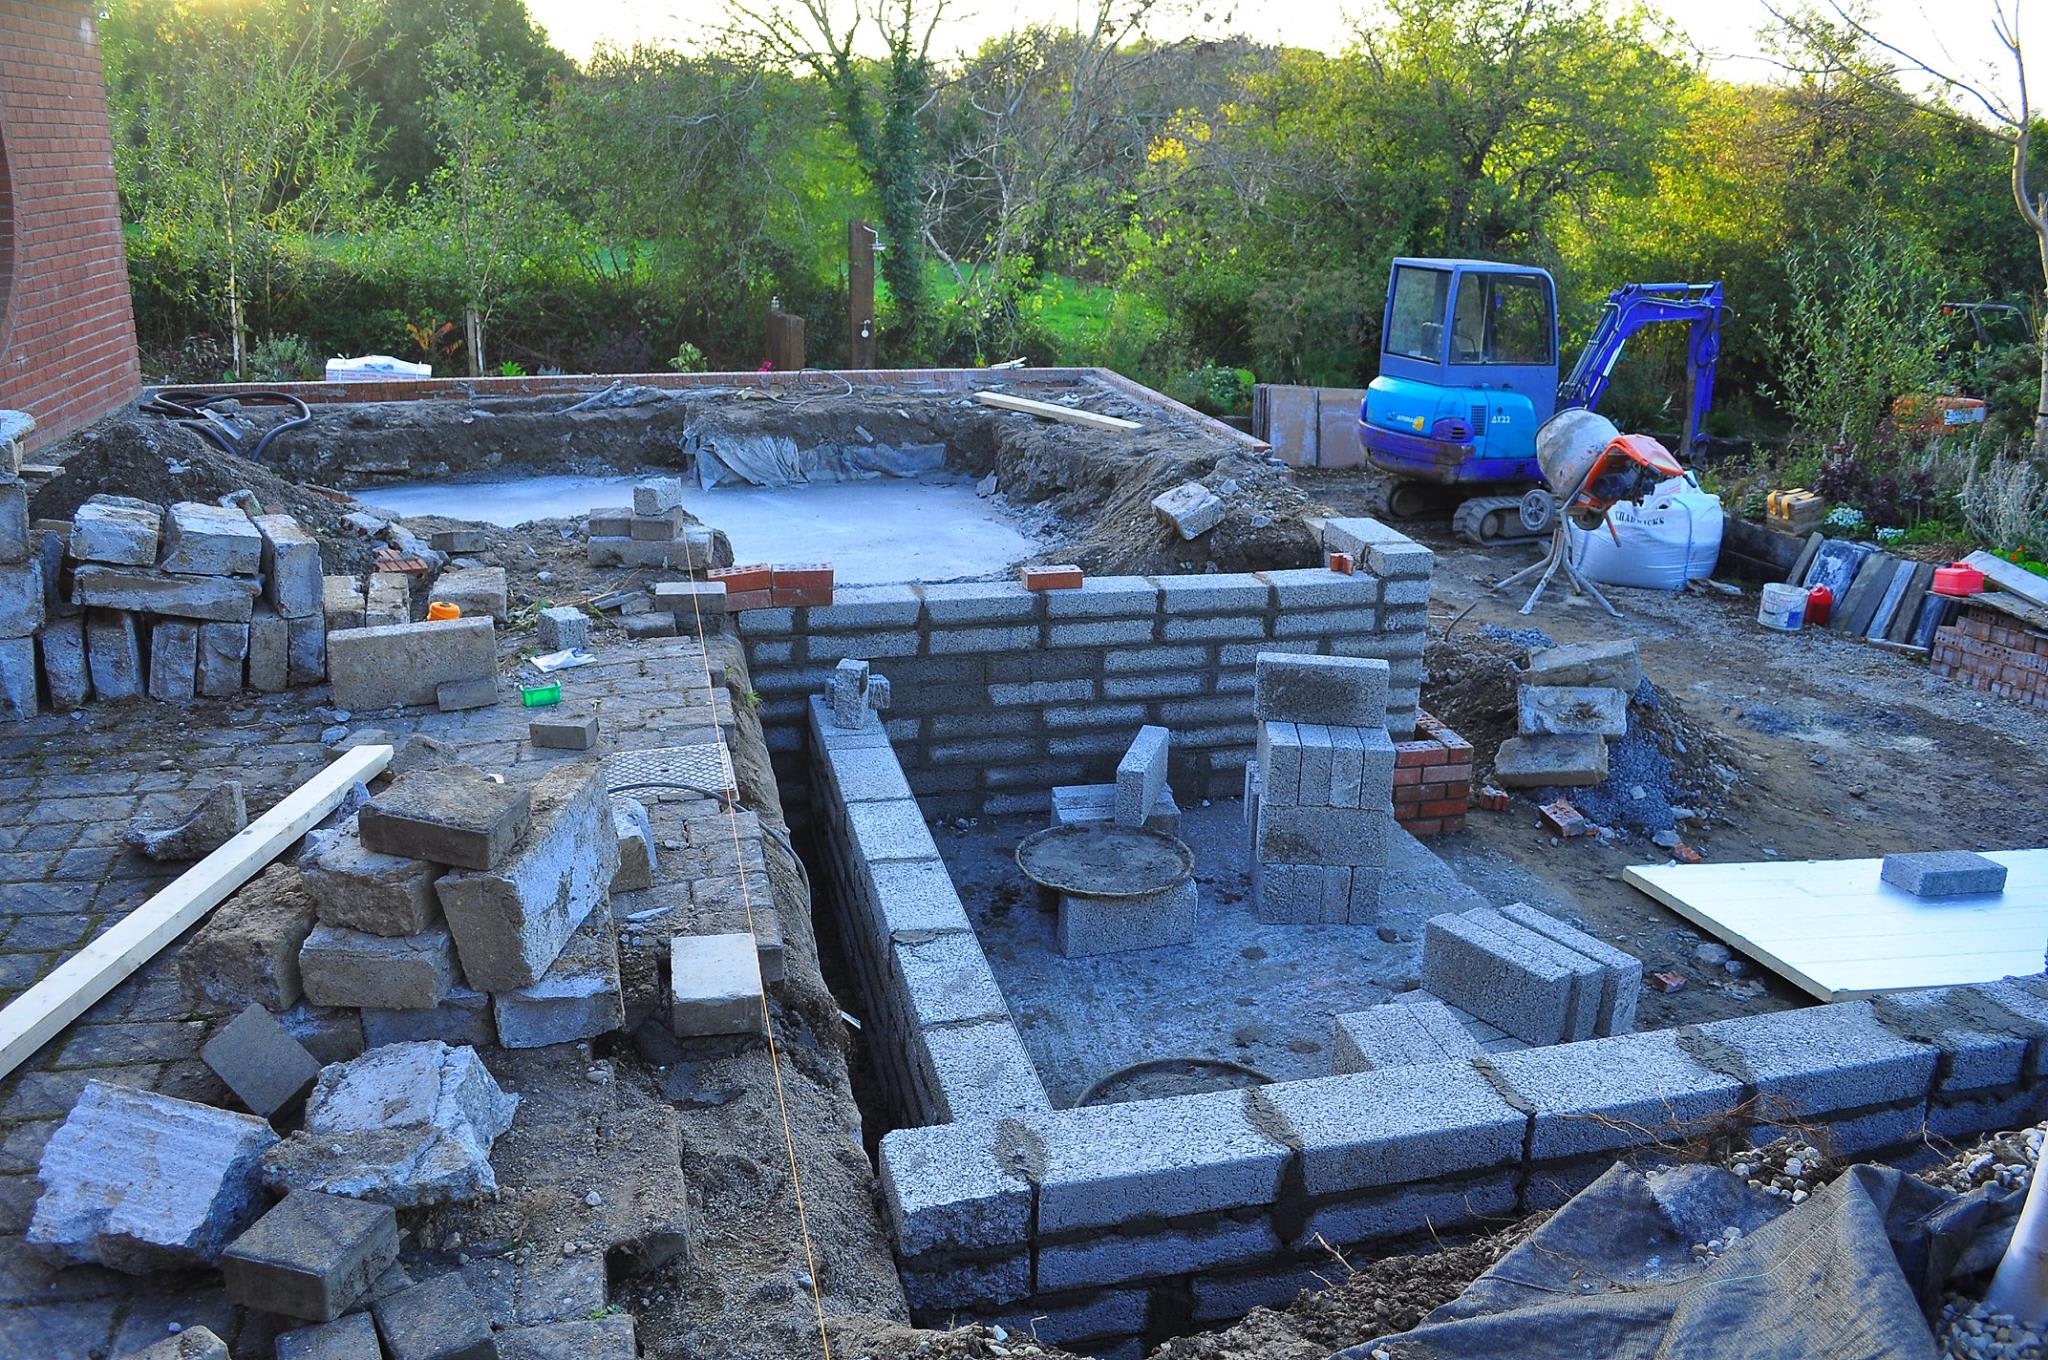 A water feature was constructed using a large Limestone slab drilled for water spouts.